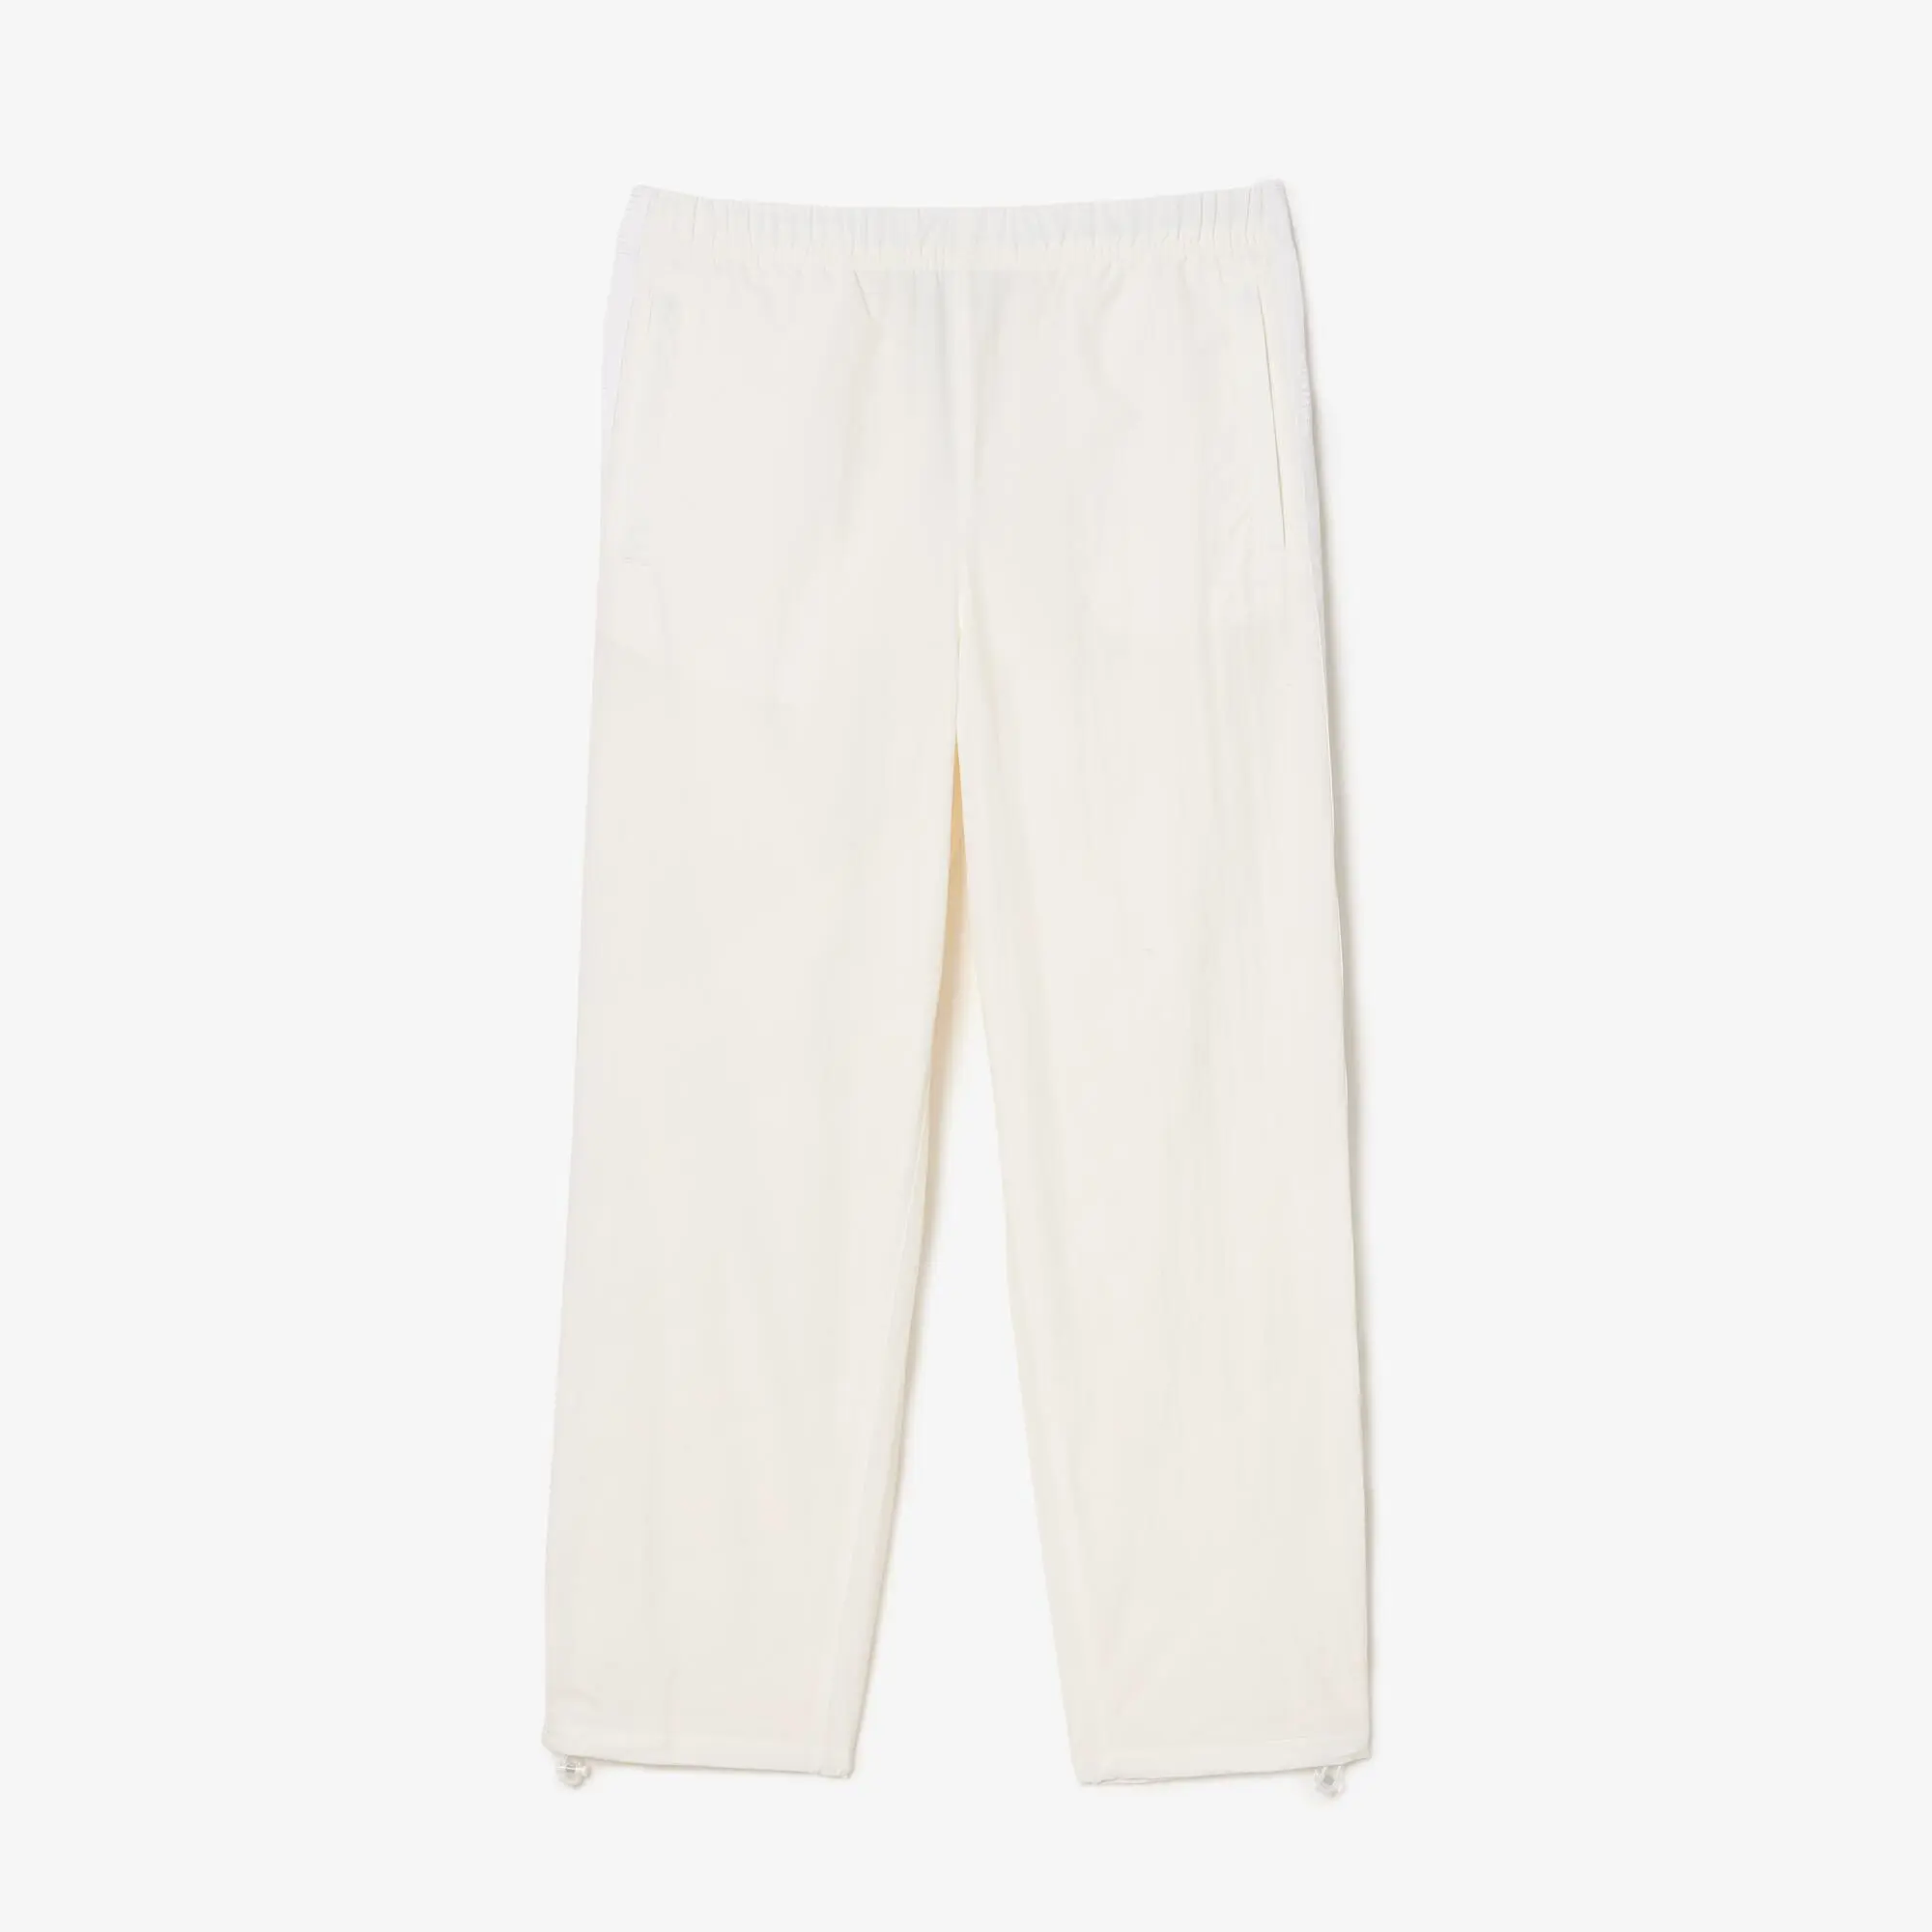 Lacoste Relaxed Fit Stripe Detail Sportsuit Track Pants. 2